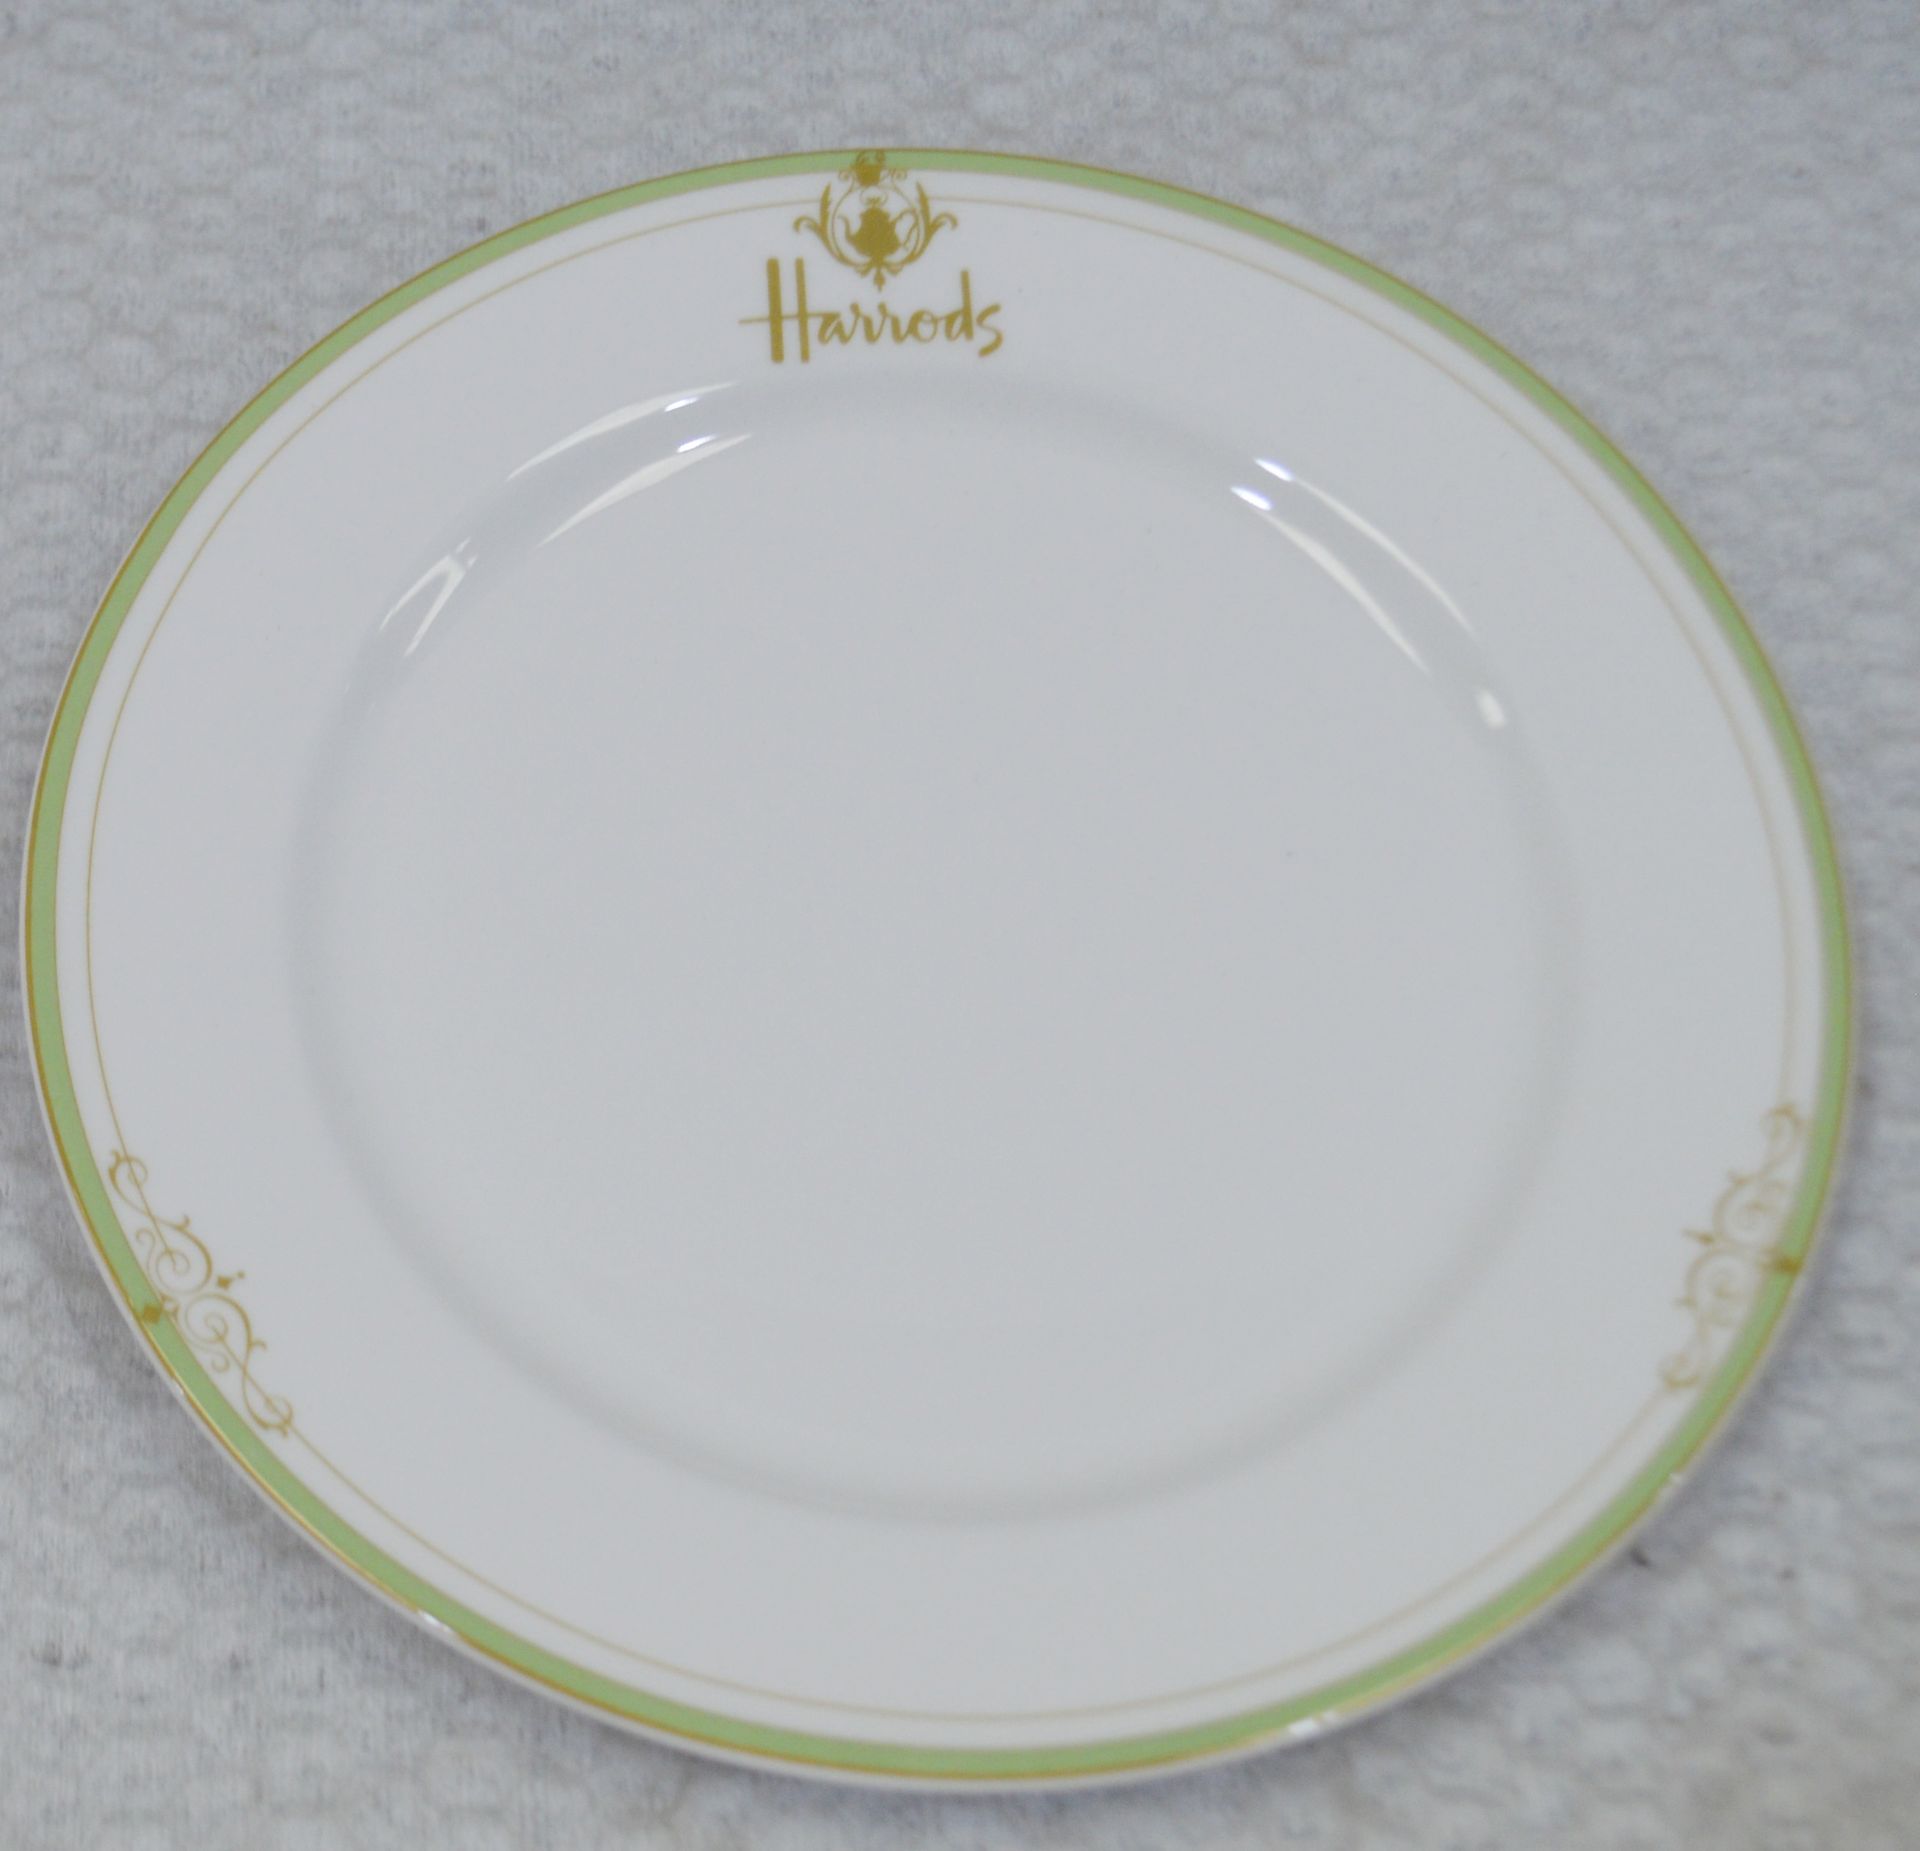 24 x Harrods Two Colour Litho Georgian Plates - Dimensions: 8 inches - Recently Removed From a